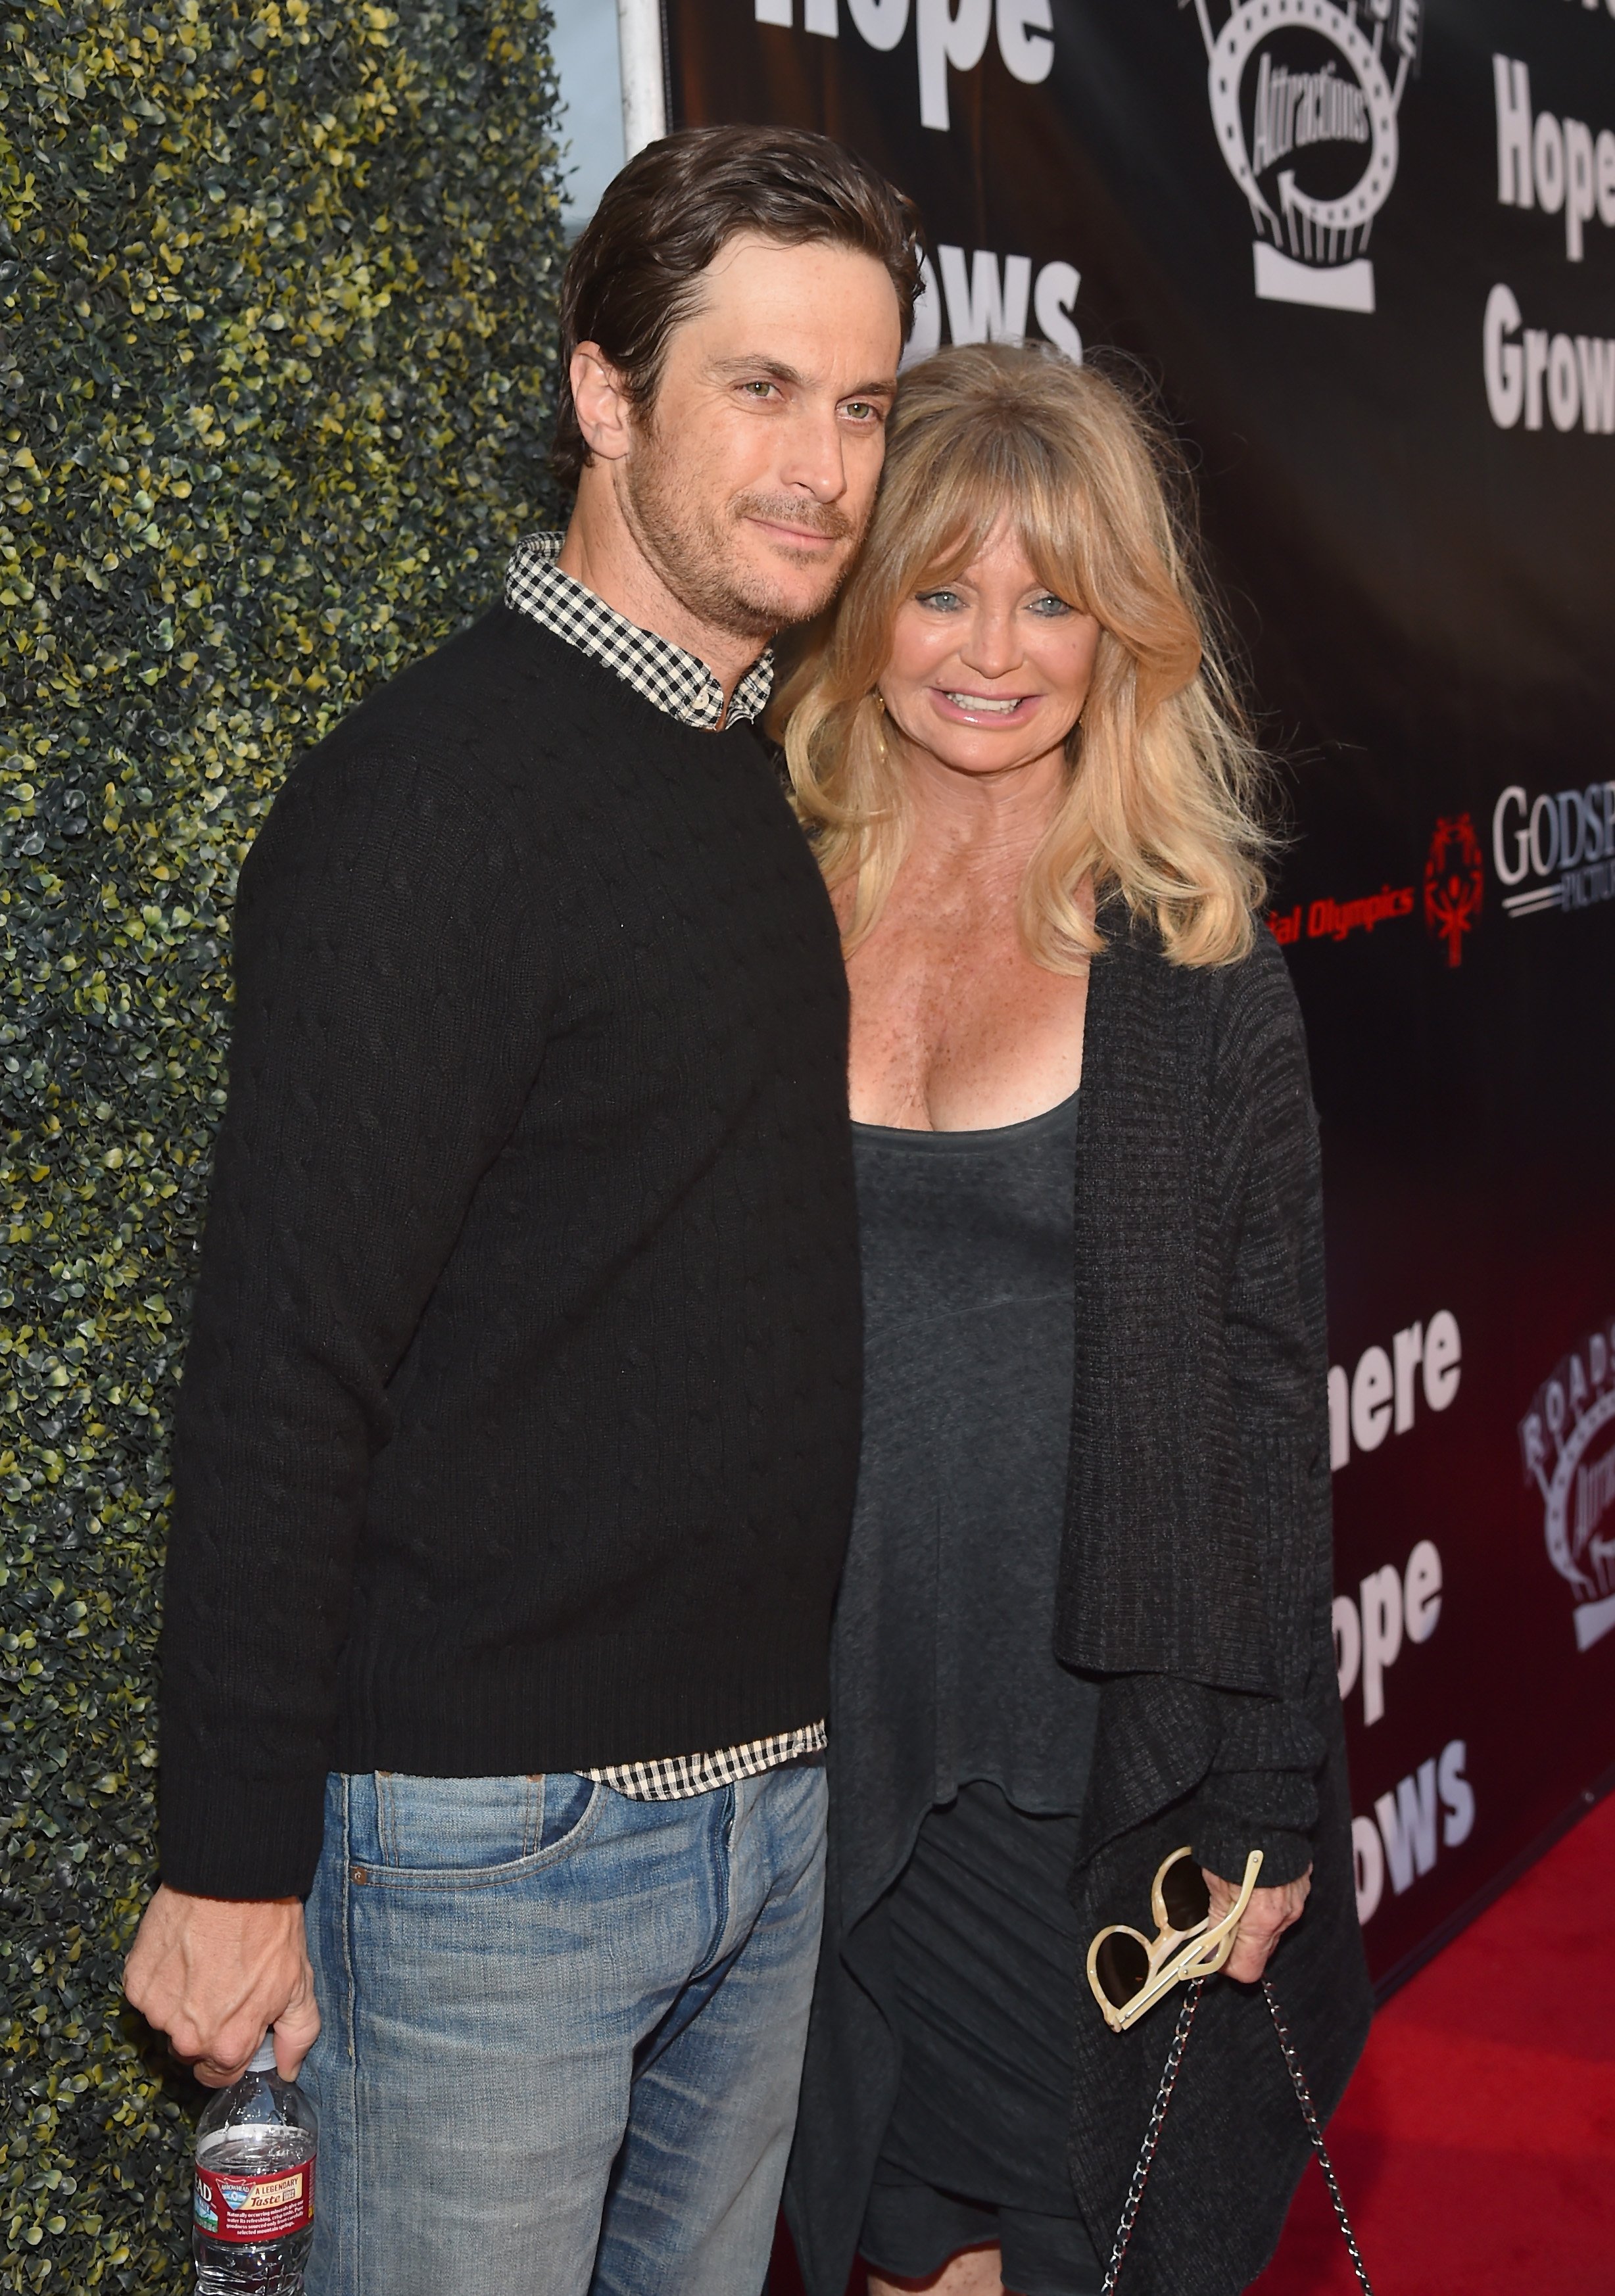 Oliver Hudson and mom Goldie Hawn attend the premiere of "Where Hope Grows" in Hollywood, California on May 4, 2015 | Photo: Getty Images